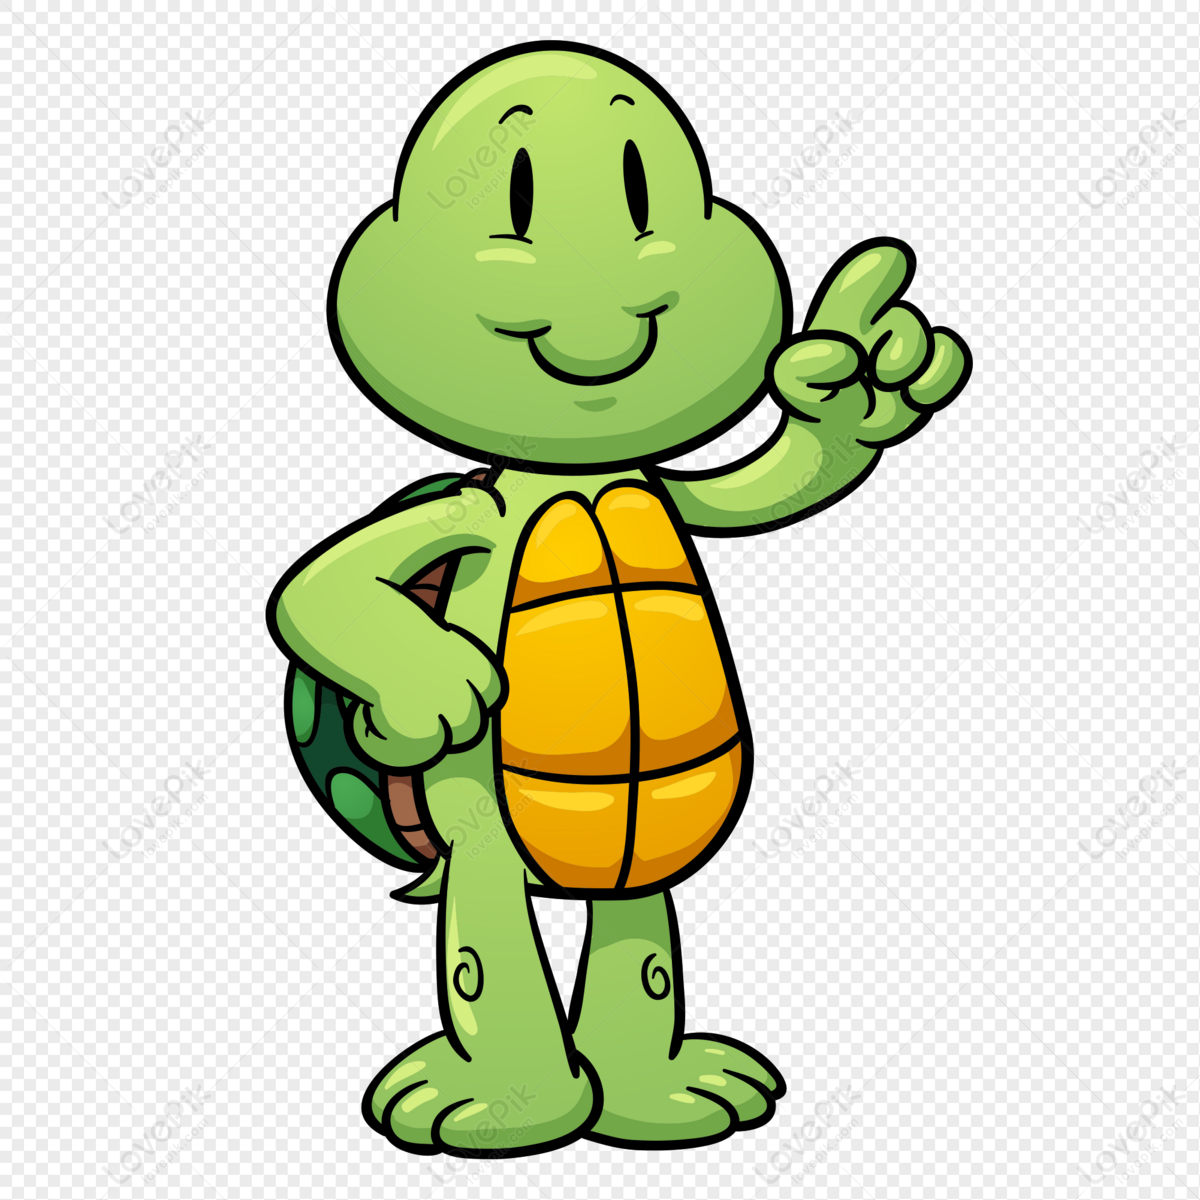 Cartoon Turtle PNG Transparent Background And Clipart Image For Free  Download - Lovepik | 401557630